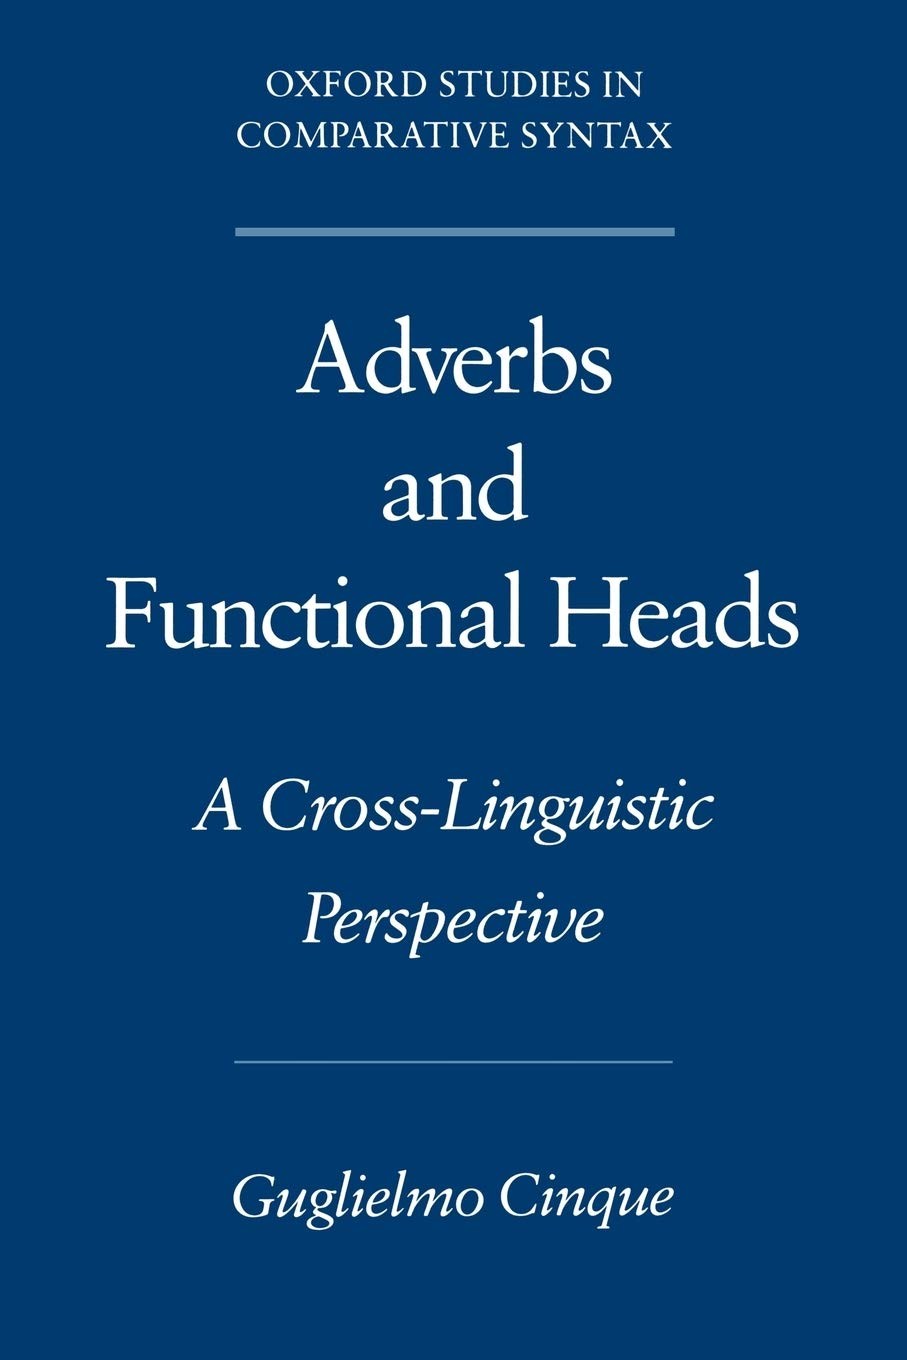 Adverbs and Functional Heads: A Cross-Linguistic Perspective